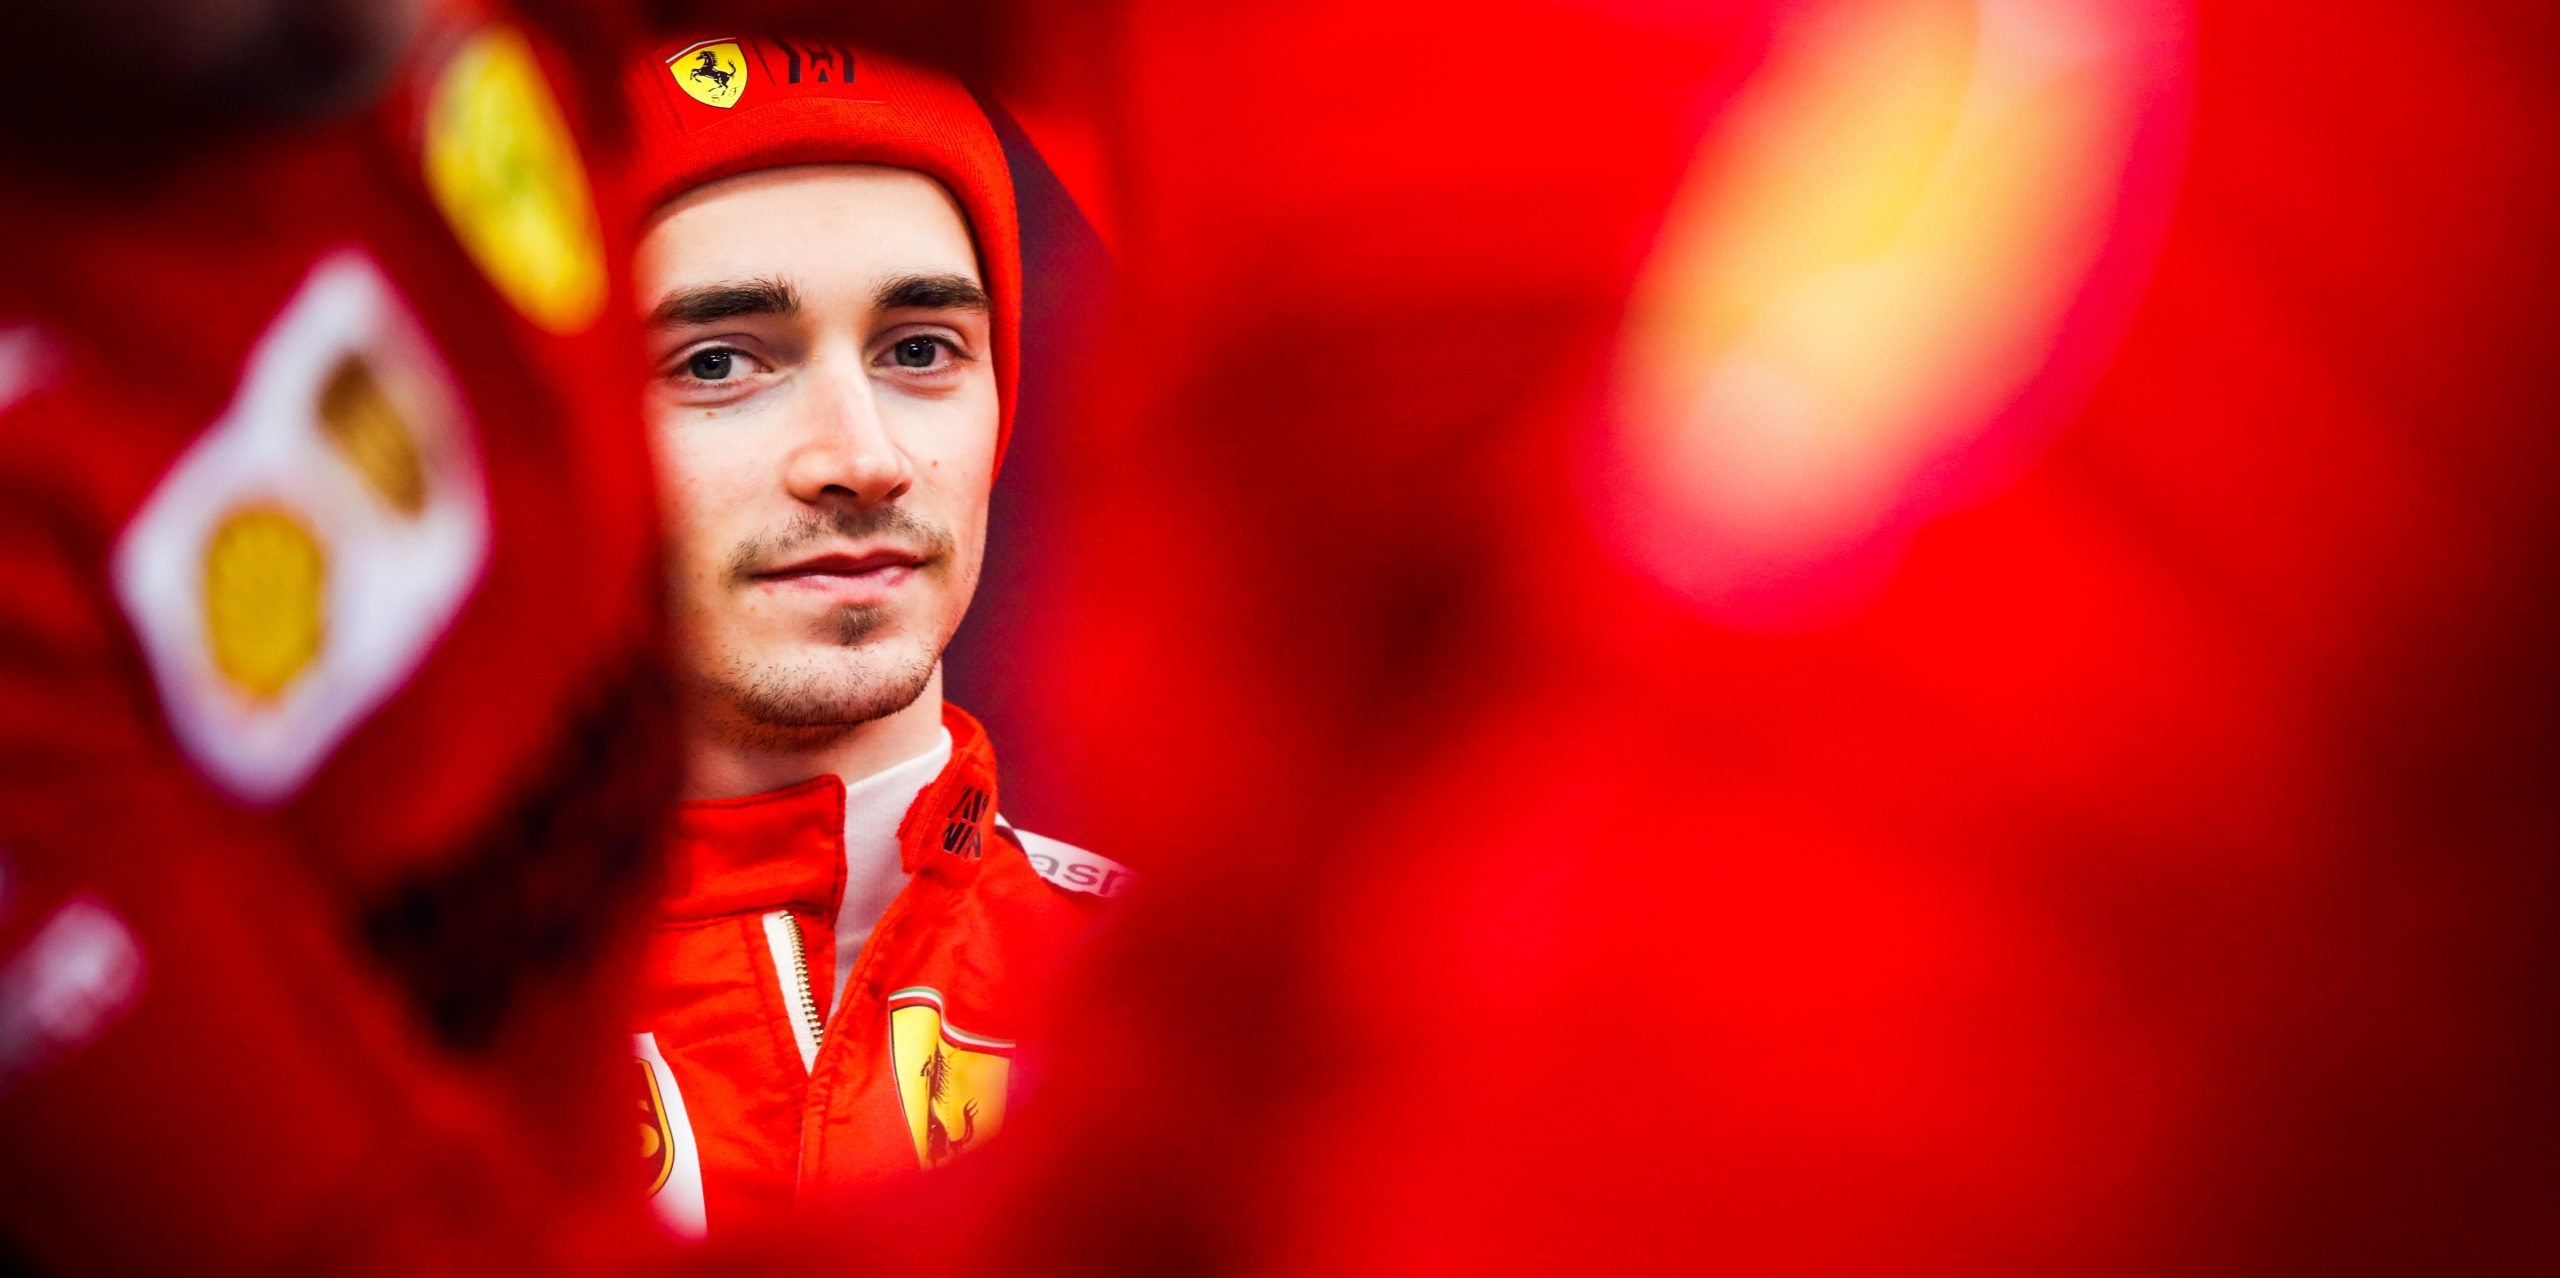 Scuderia Ferrari's Charles Leclerc from Monaco is one of the outsiders for the F1 title